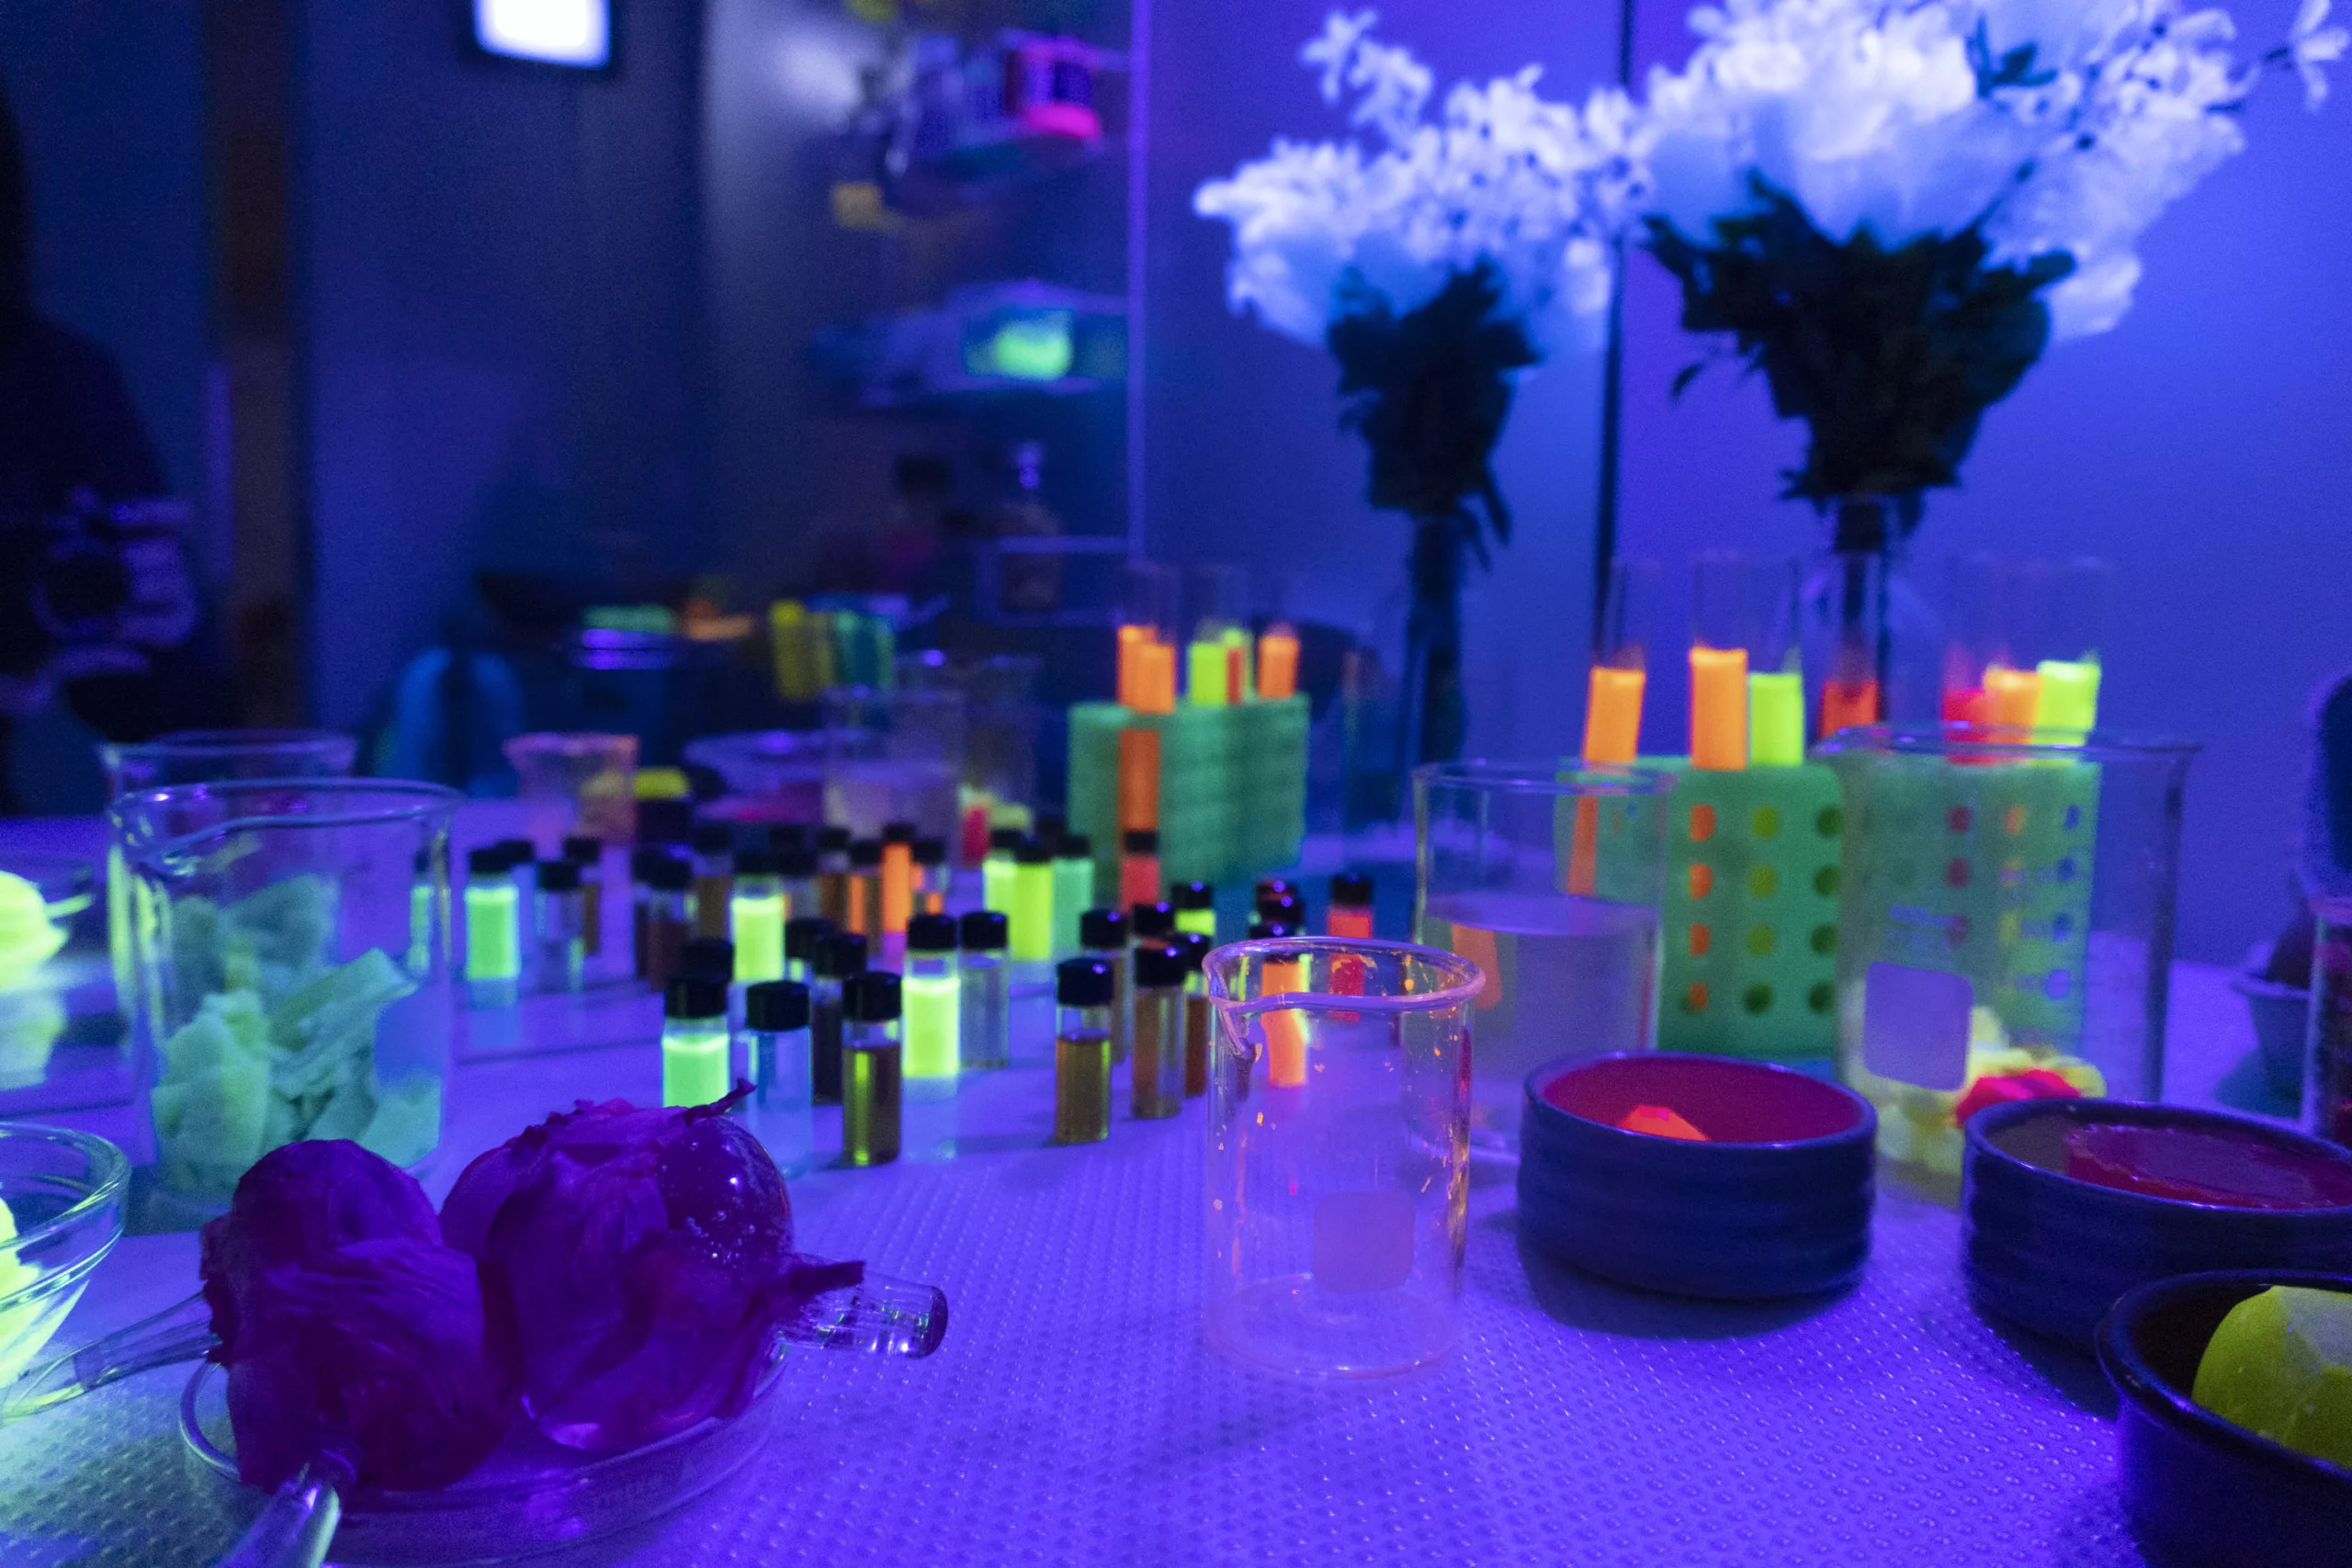 In a small room bathed in blue light, a table is set with a bouquet of glowing white flowers and a conglomeration of small glass cylinders. The glass containers are filled with glowing, UV reactive chemicals and dyes.